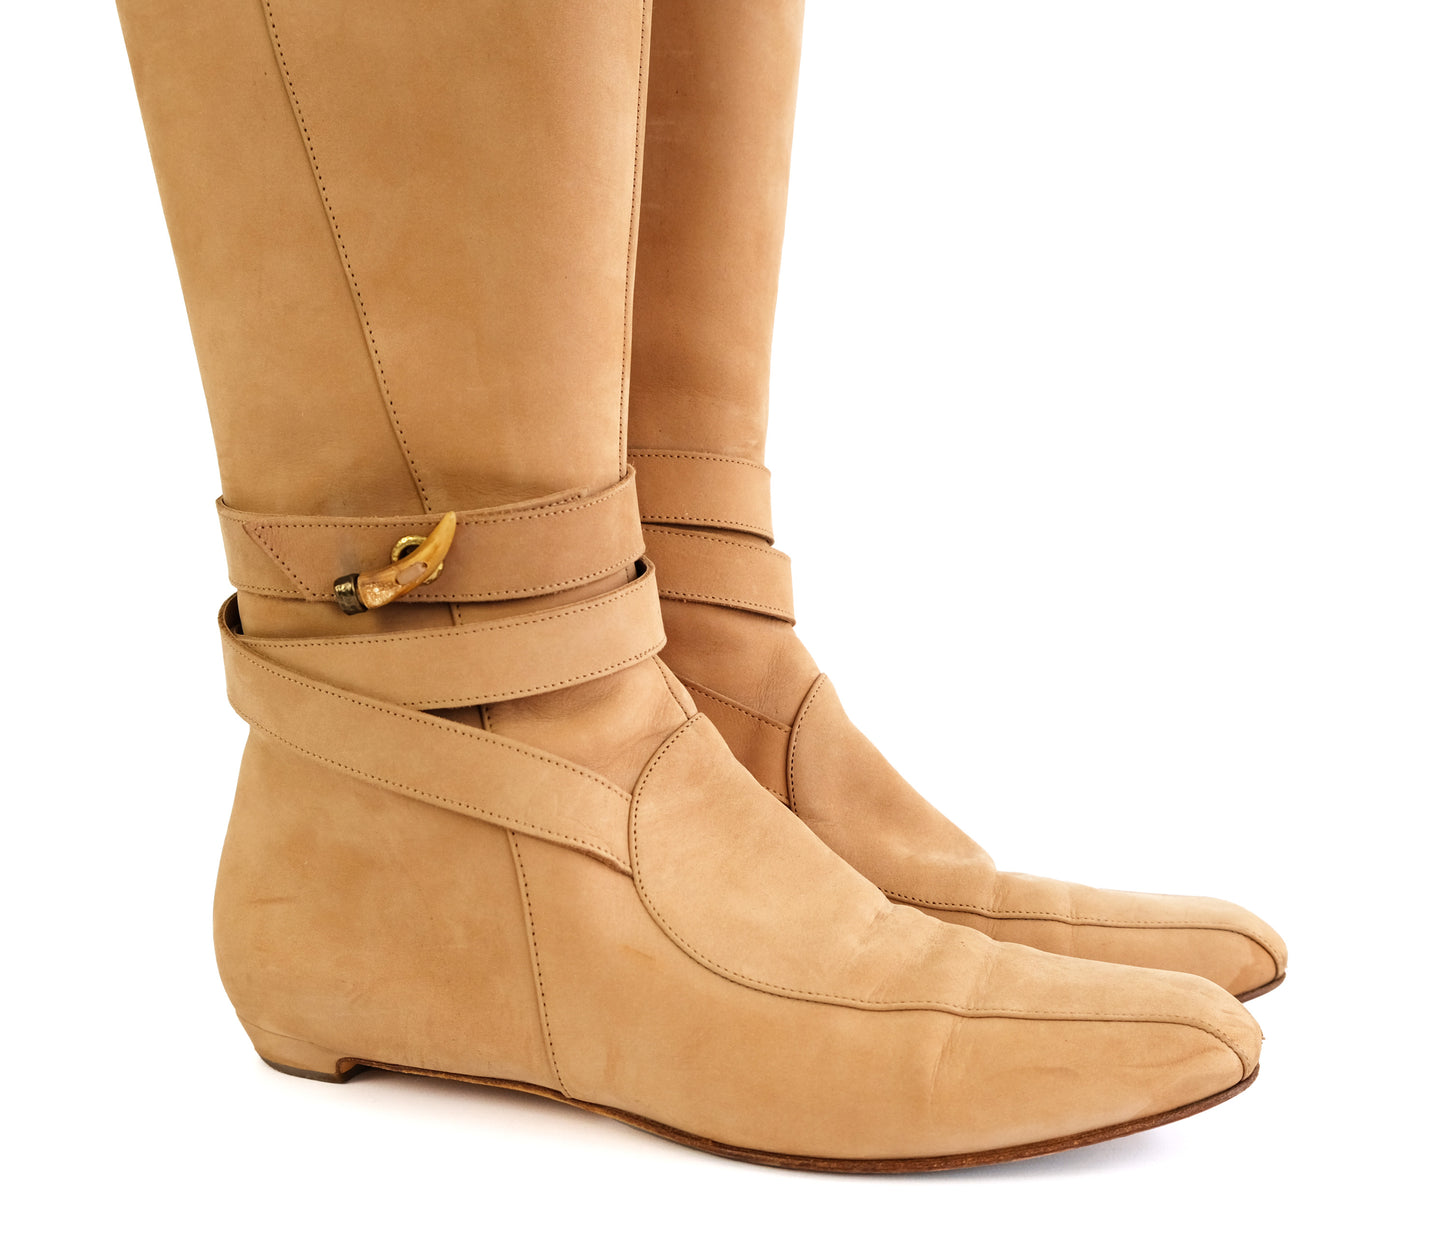 Jimmy Choo Knee Boots in Camel Suede, UK41.5